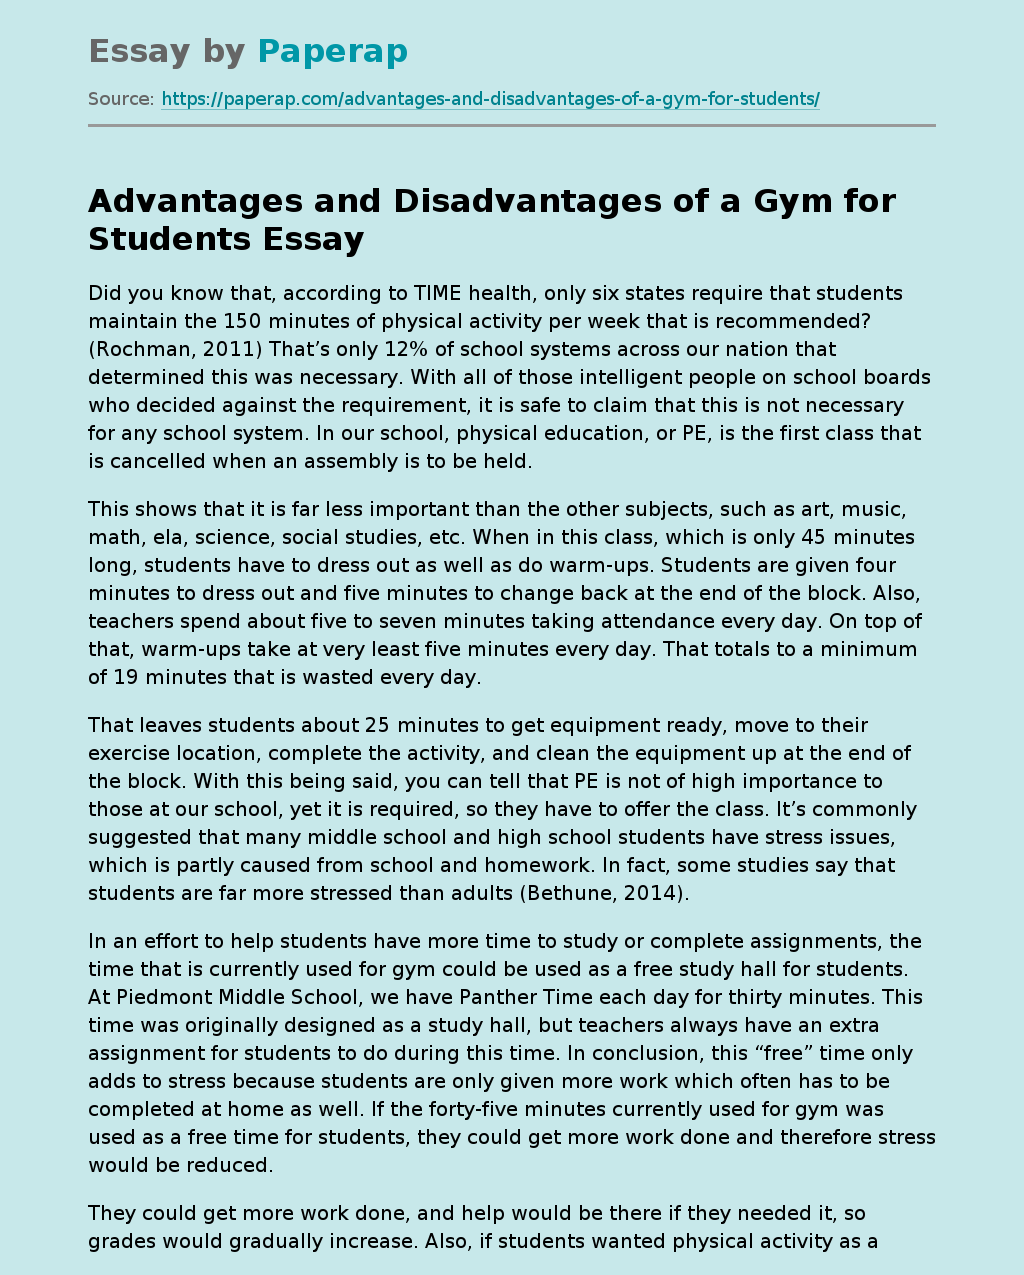 Advantages and Disadvantages of a Gym for Students